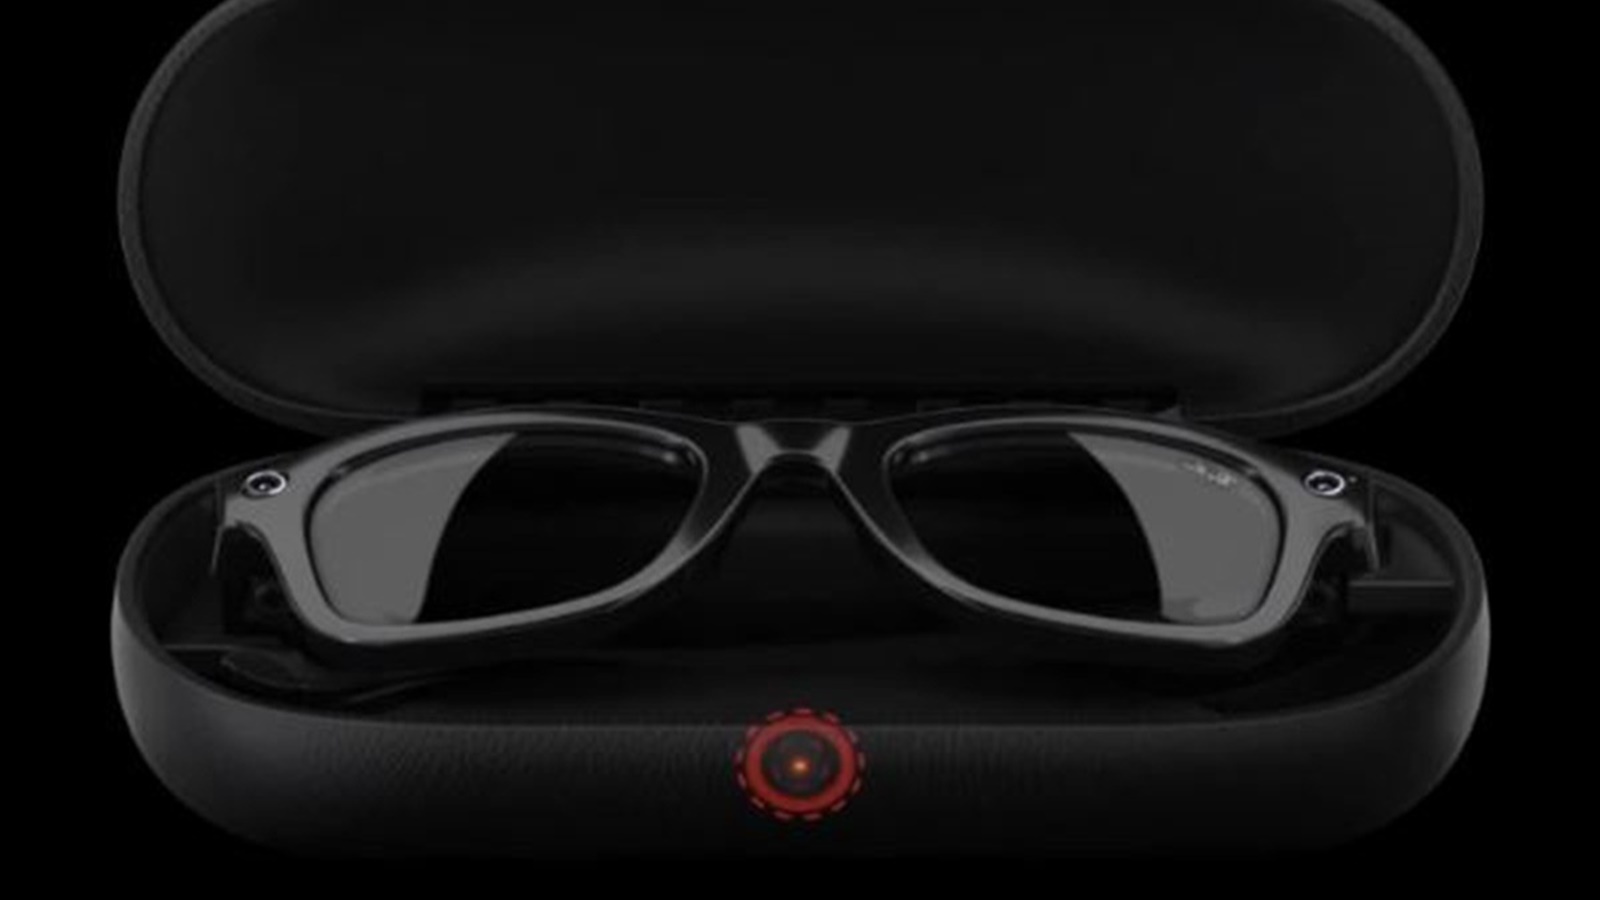 Meta Ray-Ban smart glasses get AI treatment, can hear, see and describe  things